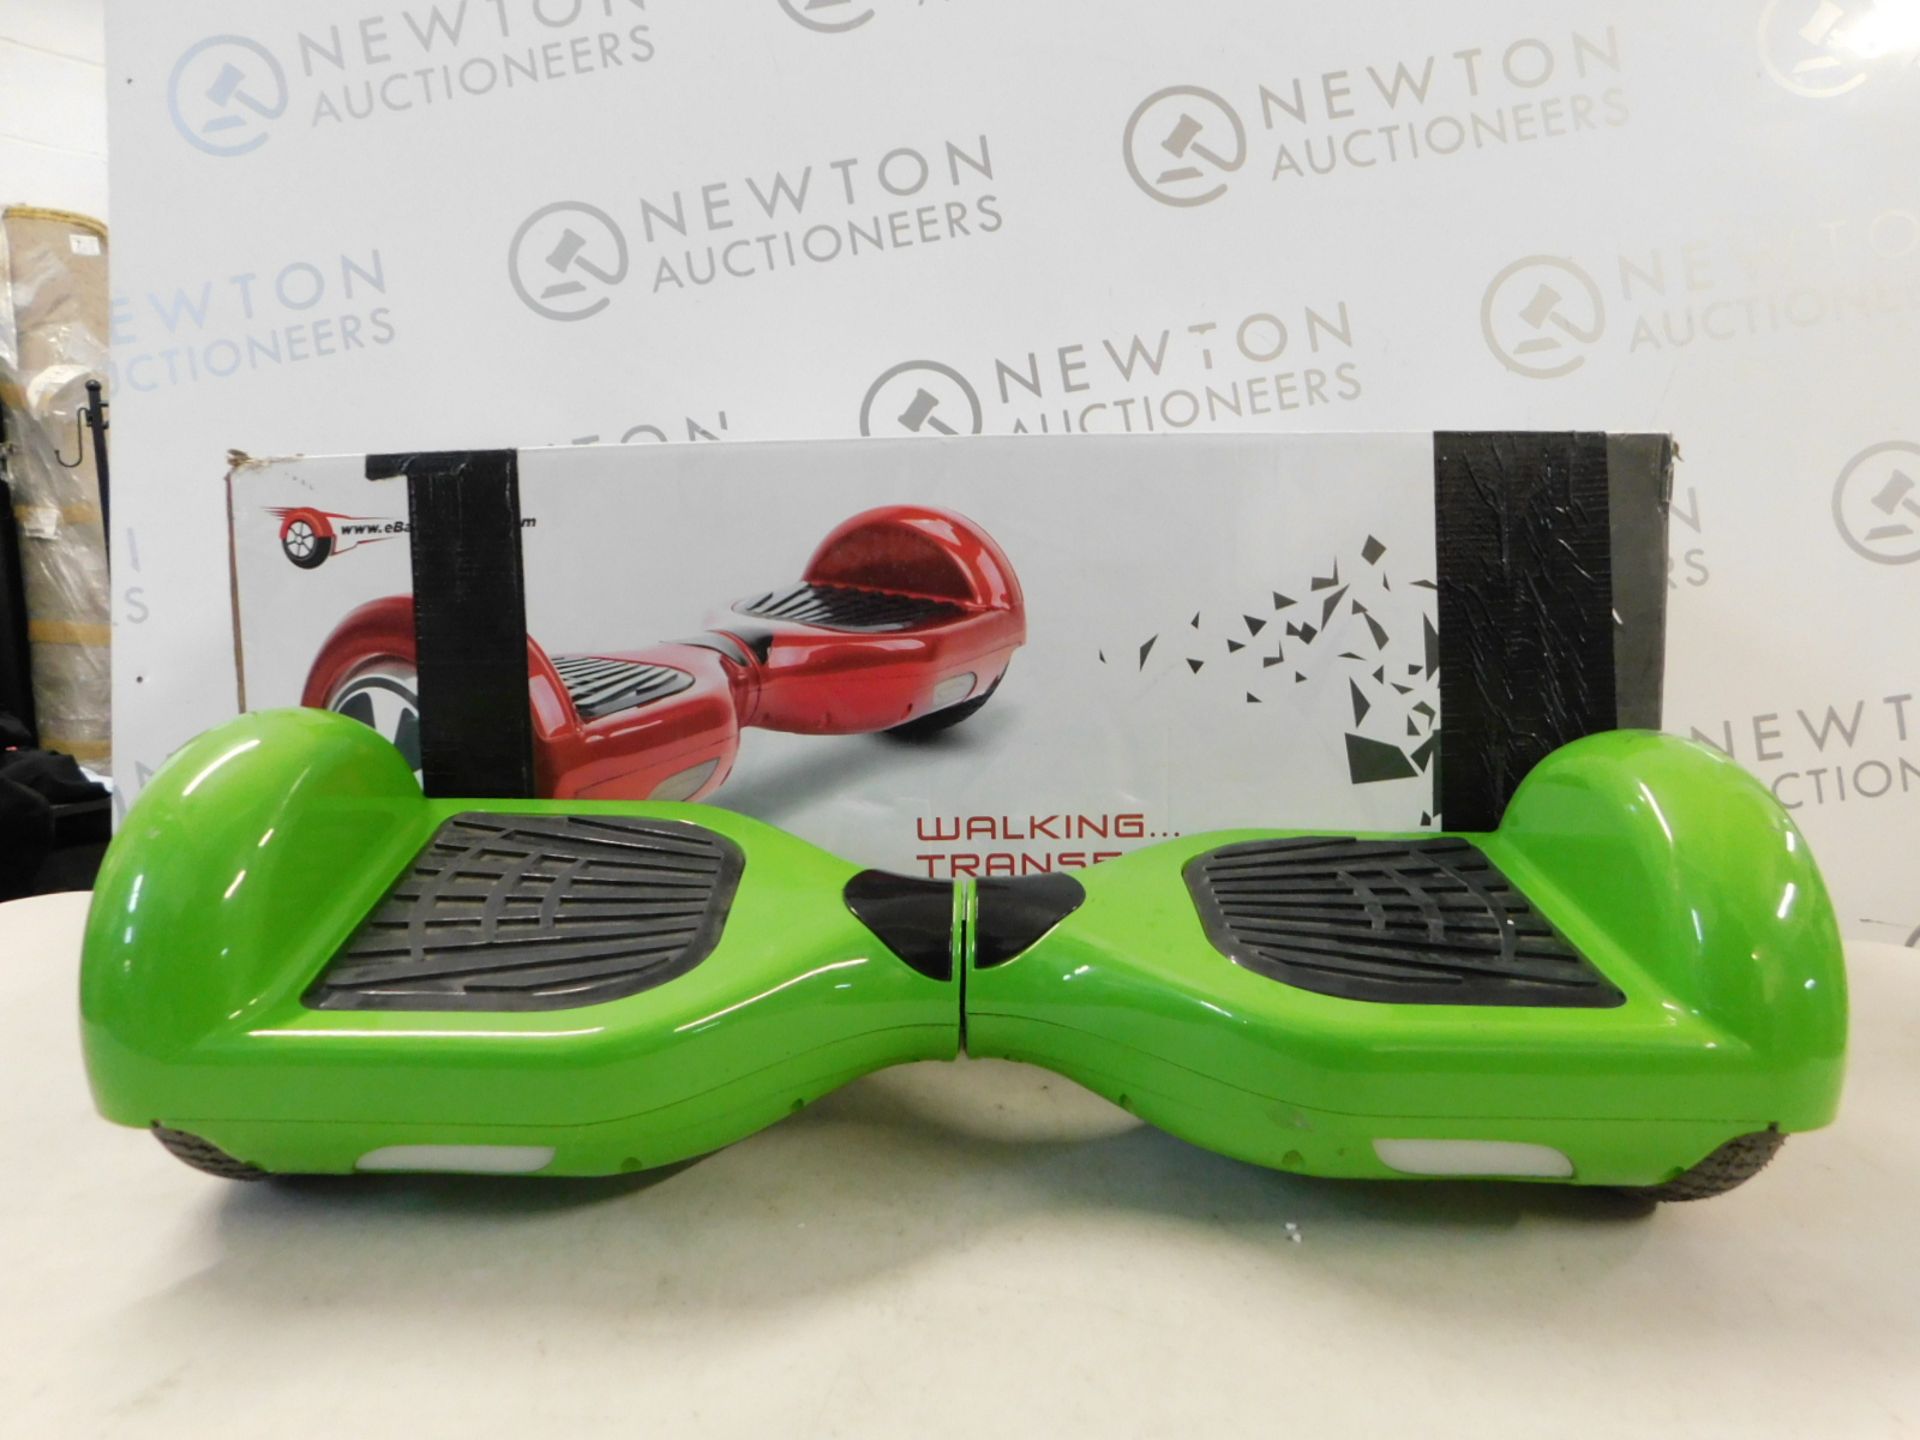 1 BOXED SMART BALANCE WHEEL HOVERBOARD IN GREEN WITH CHARGER RRP Â£299 (TESTED & WORKING)